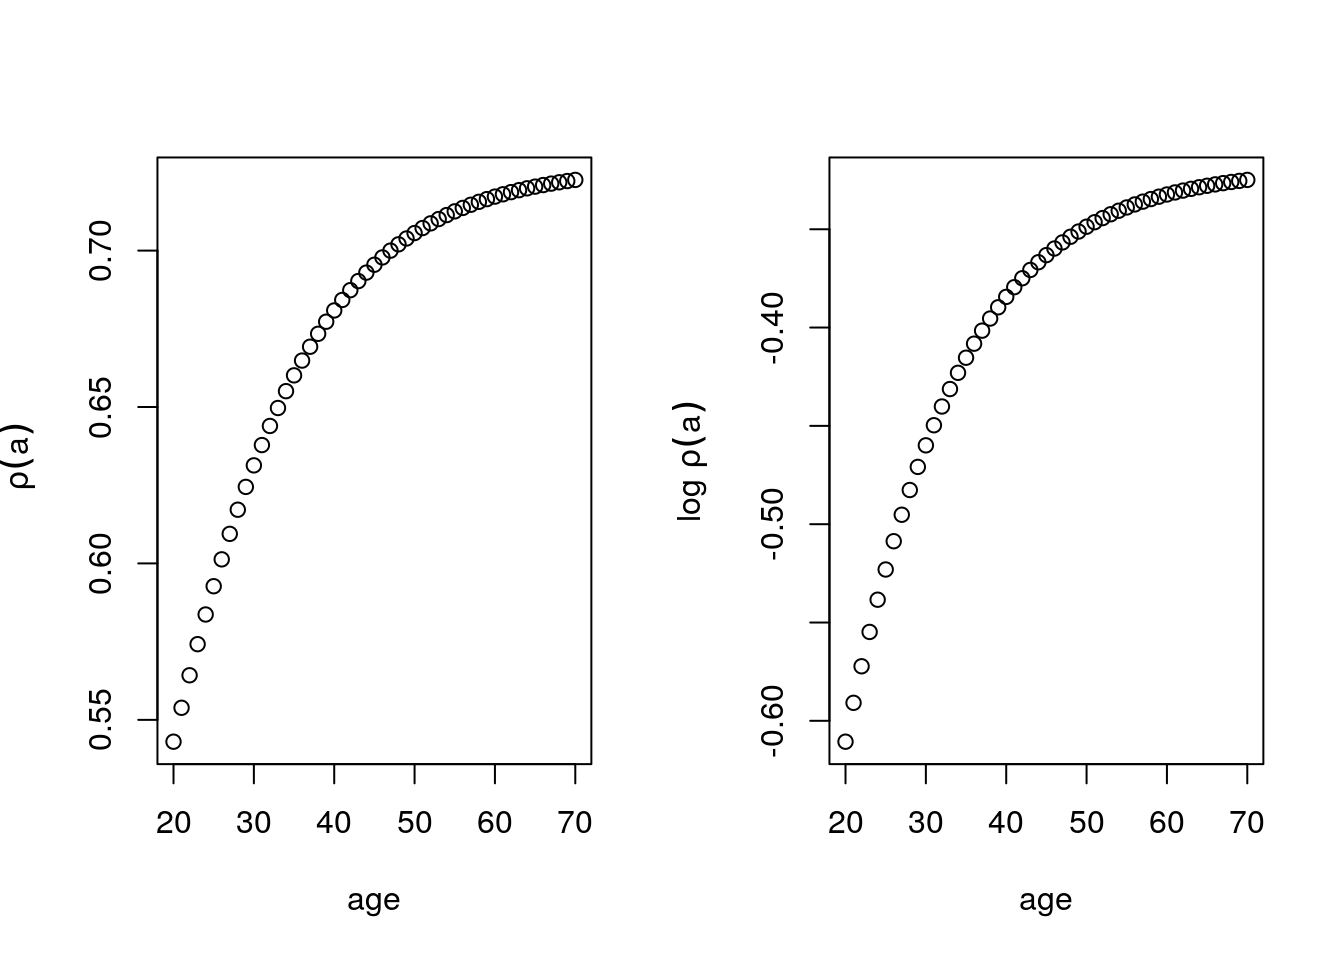 $\rho(a)$ as a function of age